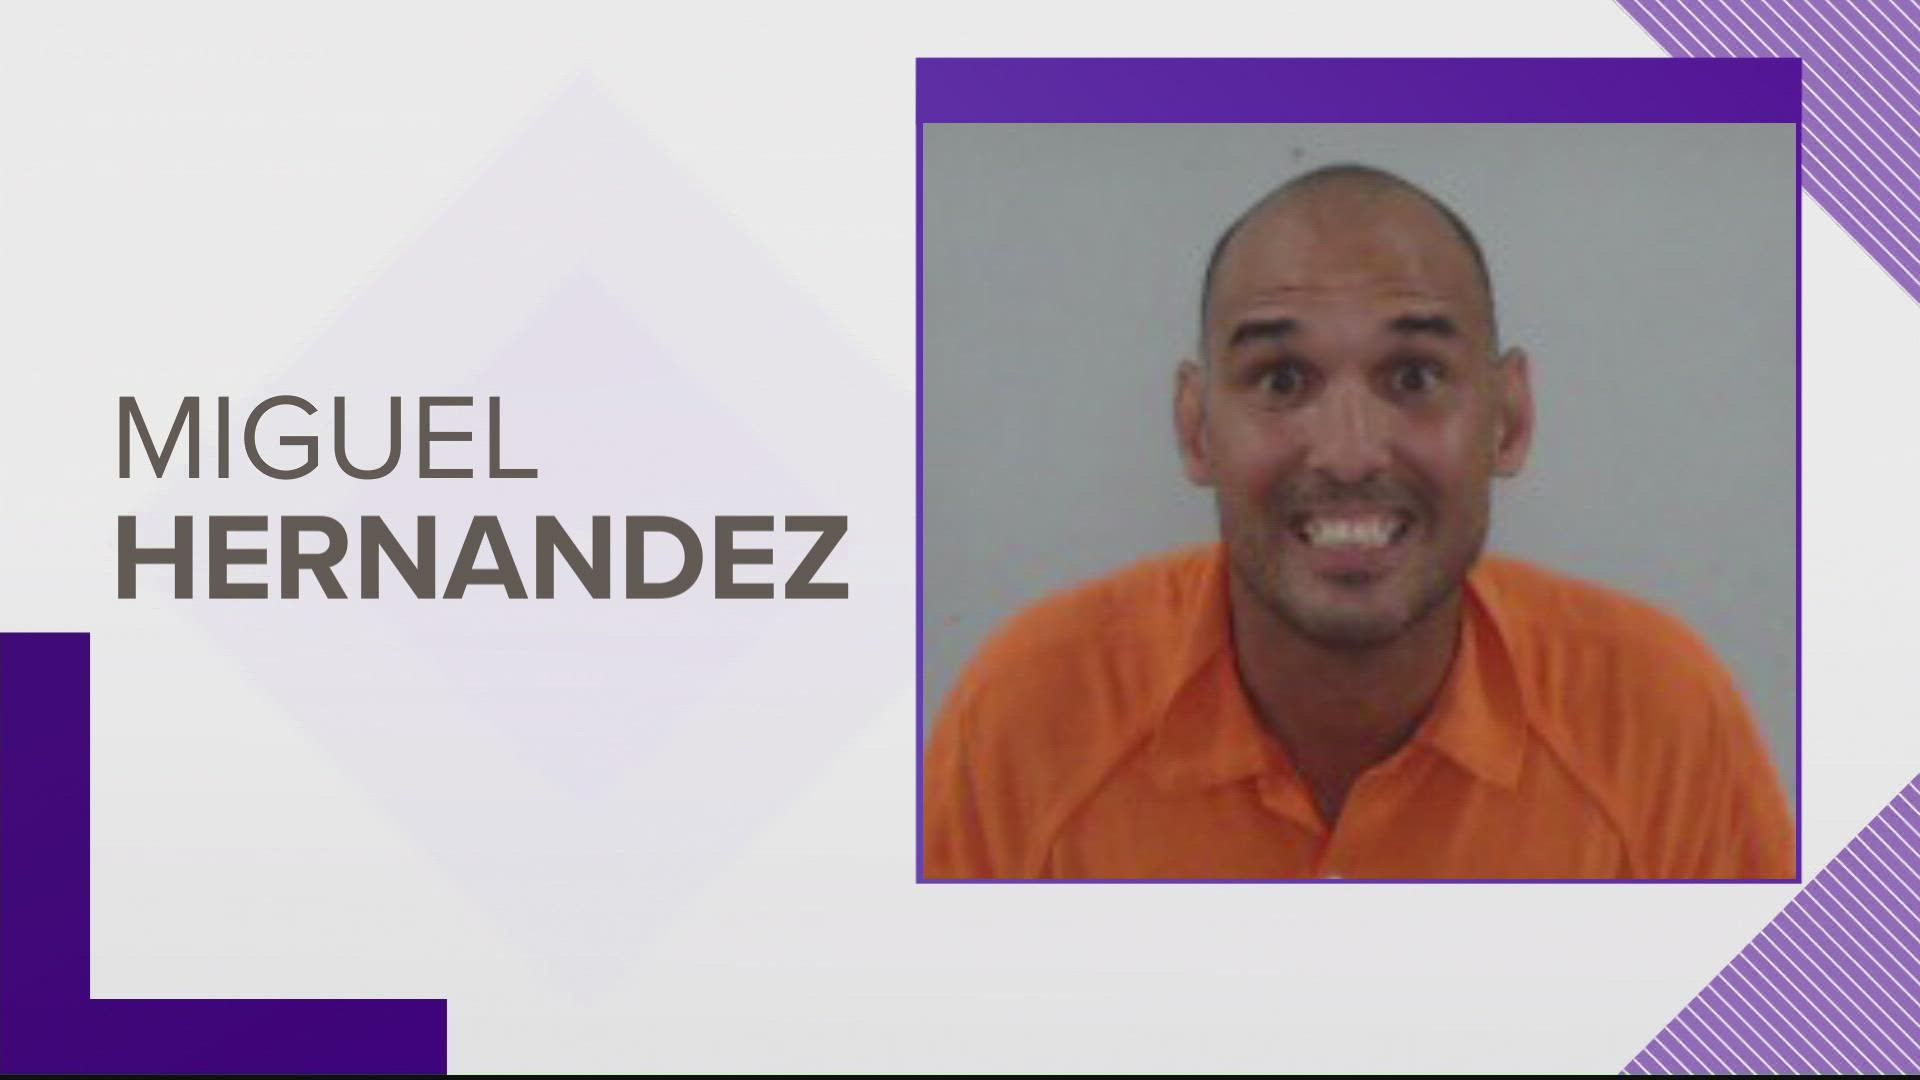 A man wanted for murder in the Miami-Dade area was arrested in Columbia County Friday morning, according to the Florida Highway Patrol.